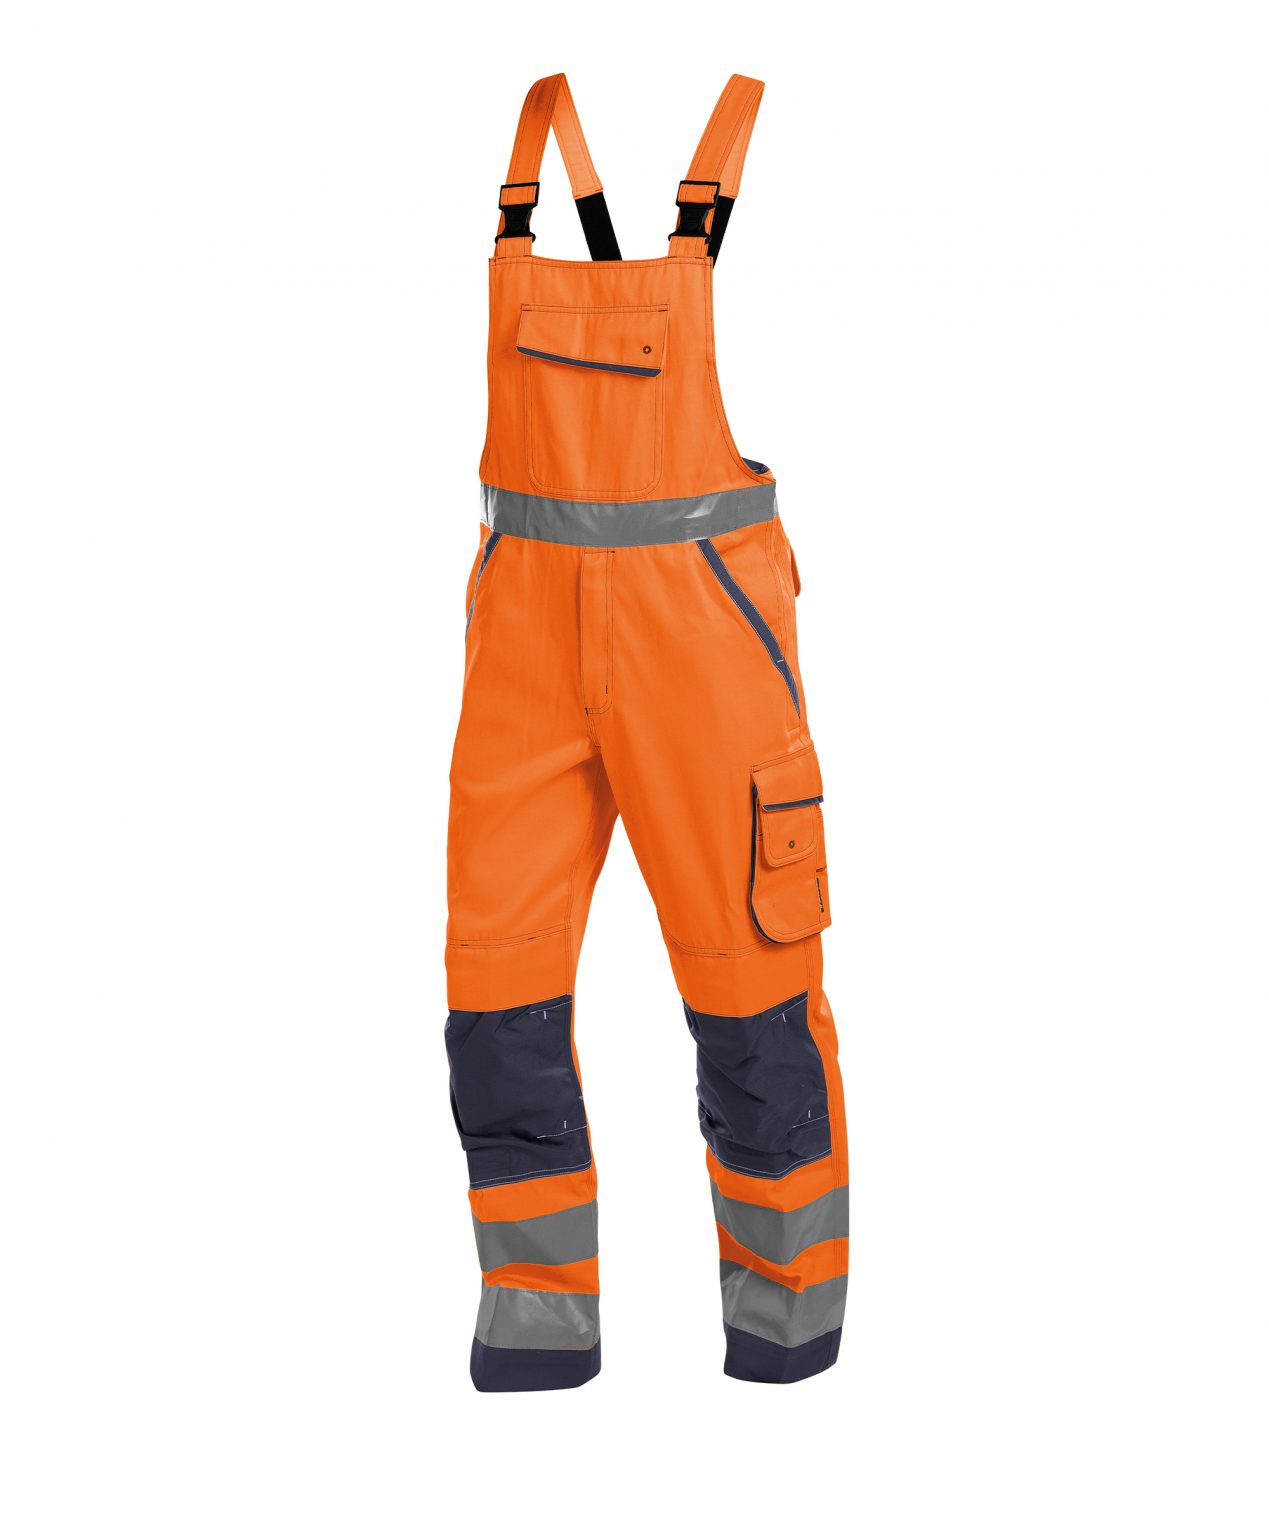 malmedy high visibility brace overall with knee pockets fluo orange navy front